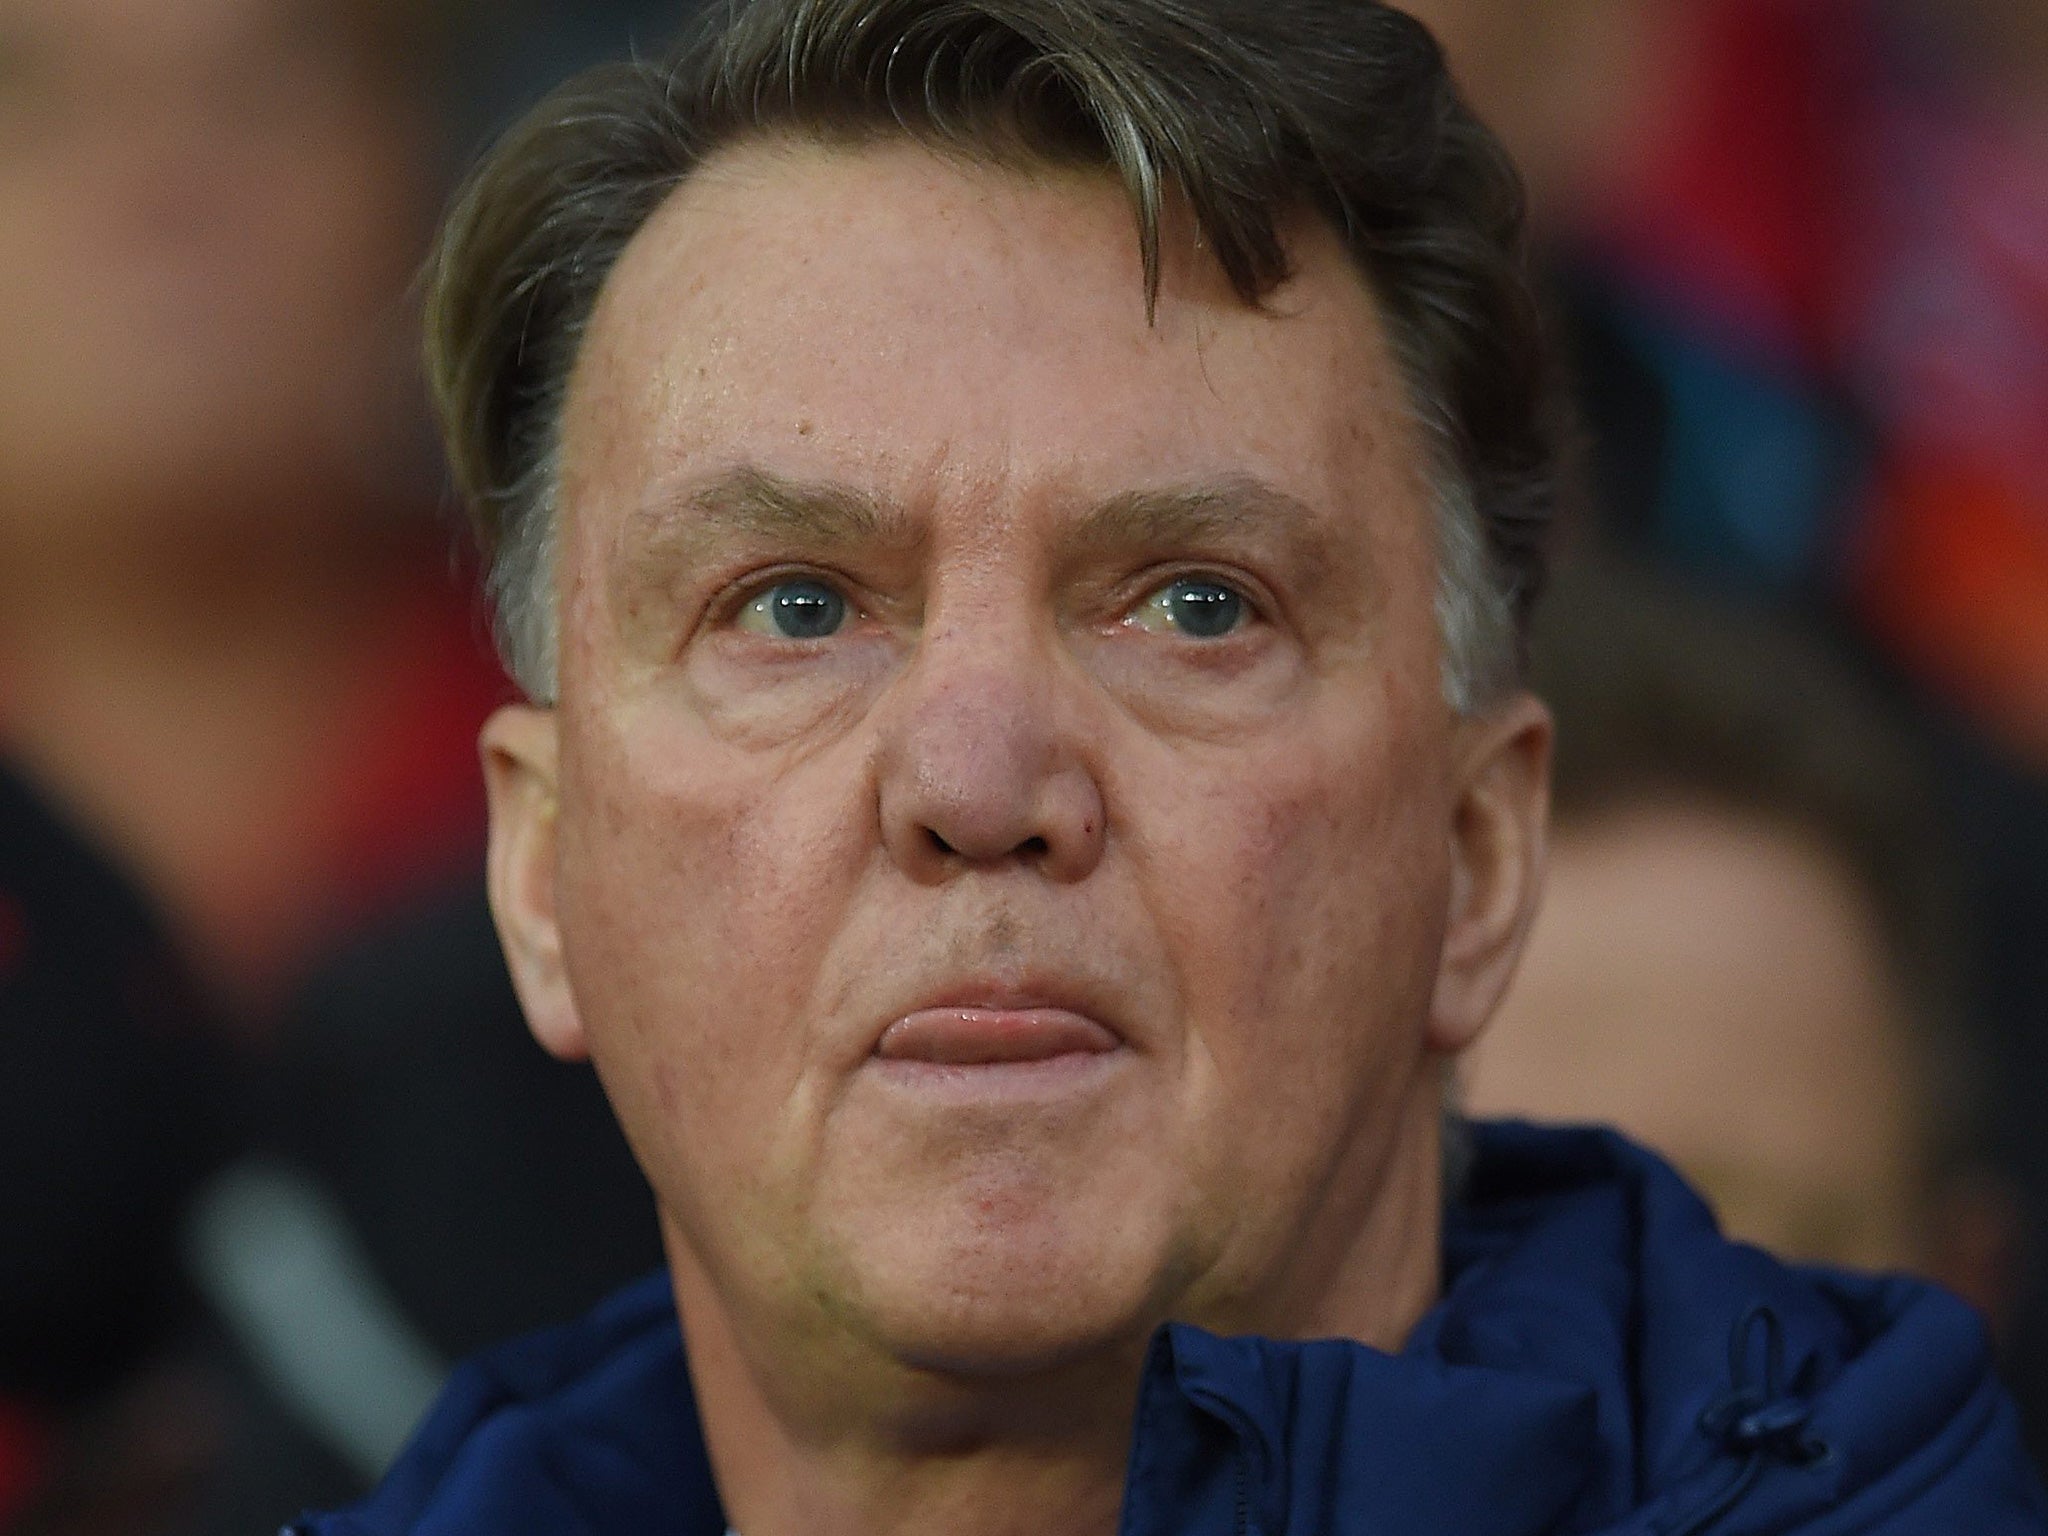 Louis van Gaal looks on from the stands